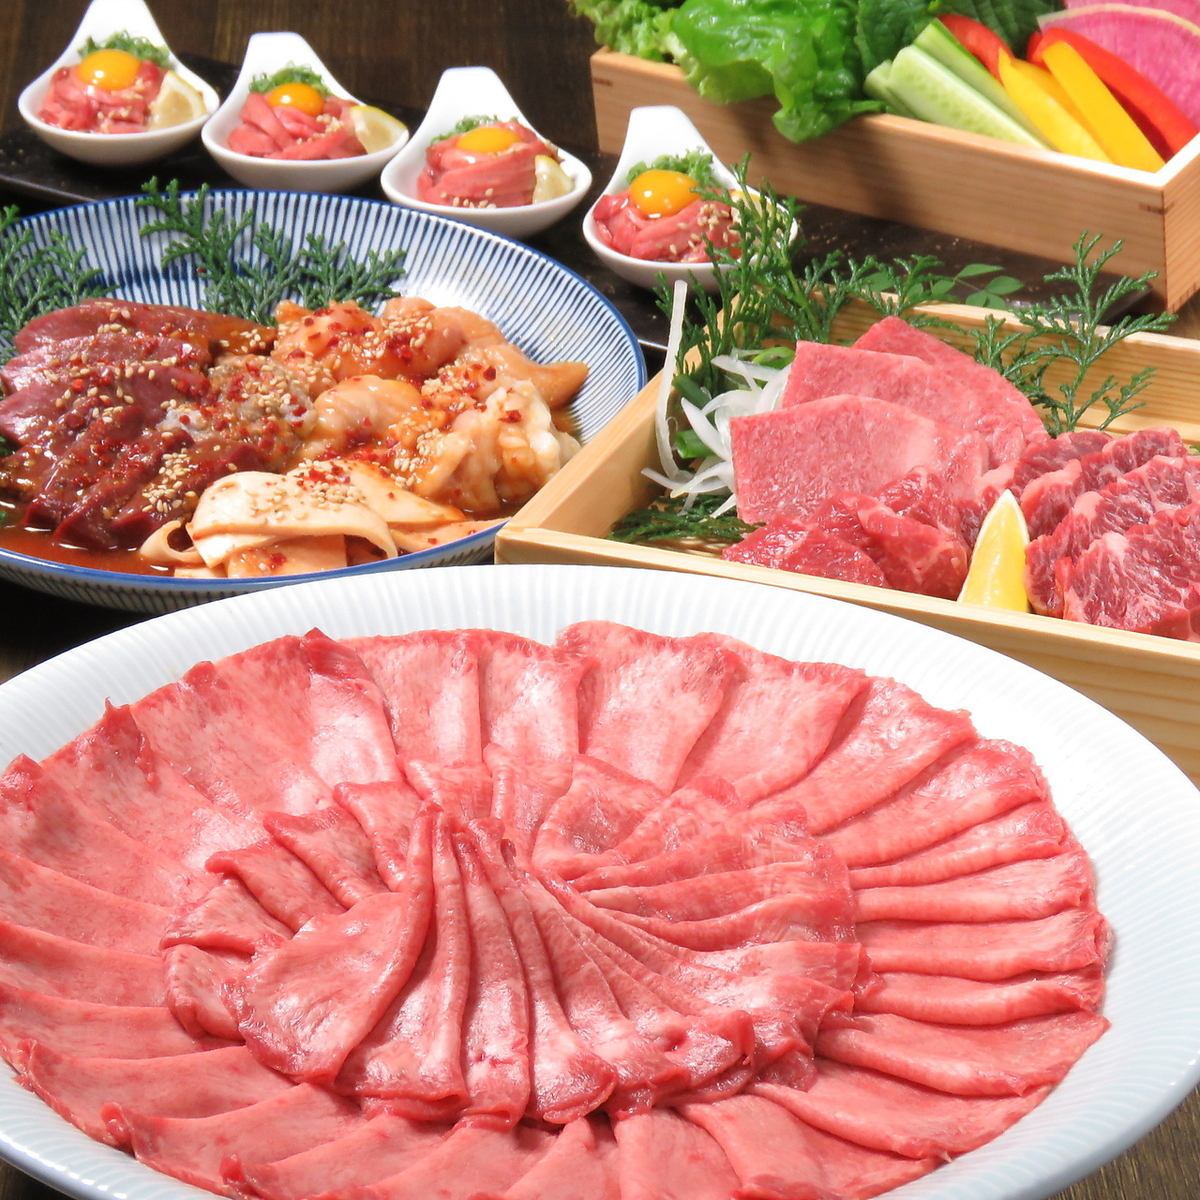 Offering carefully selected meat